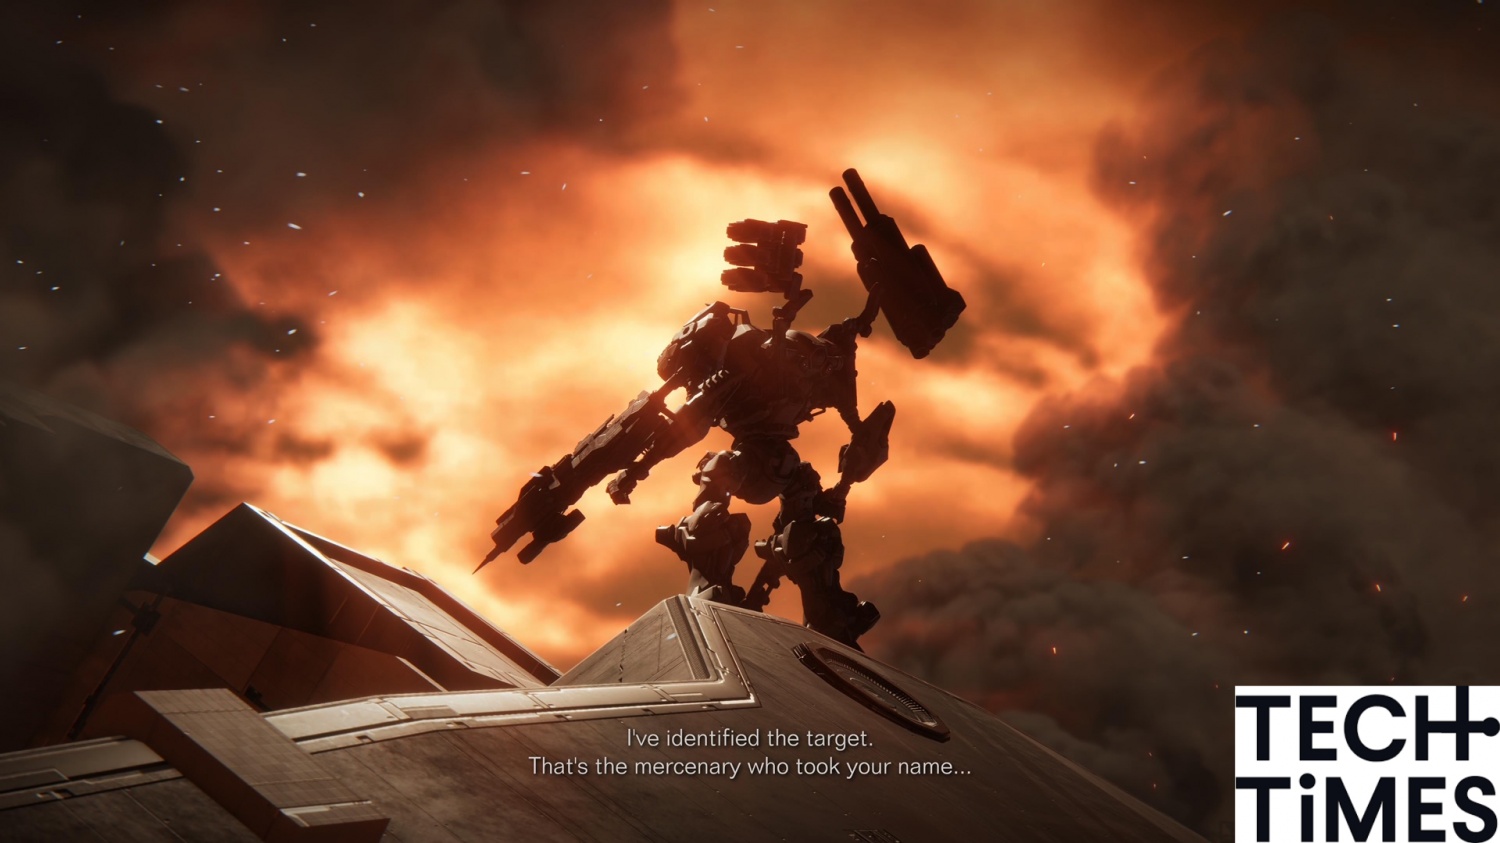 Armored Core VI review: FromSoftware's latest challenge is surprisingly  approachable